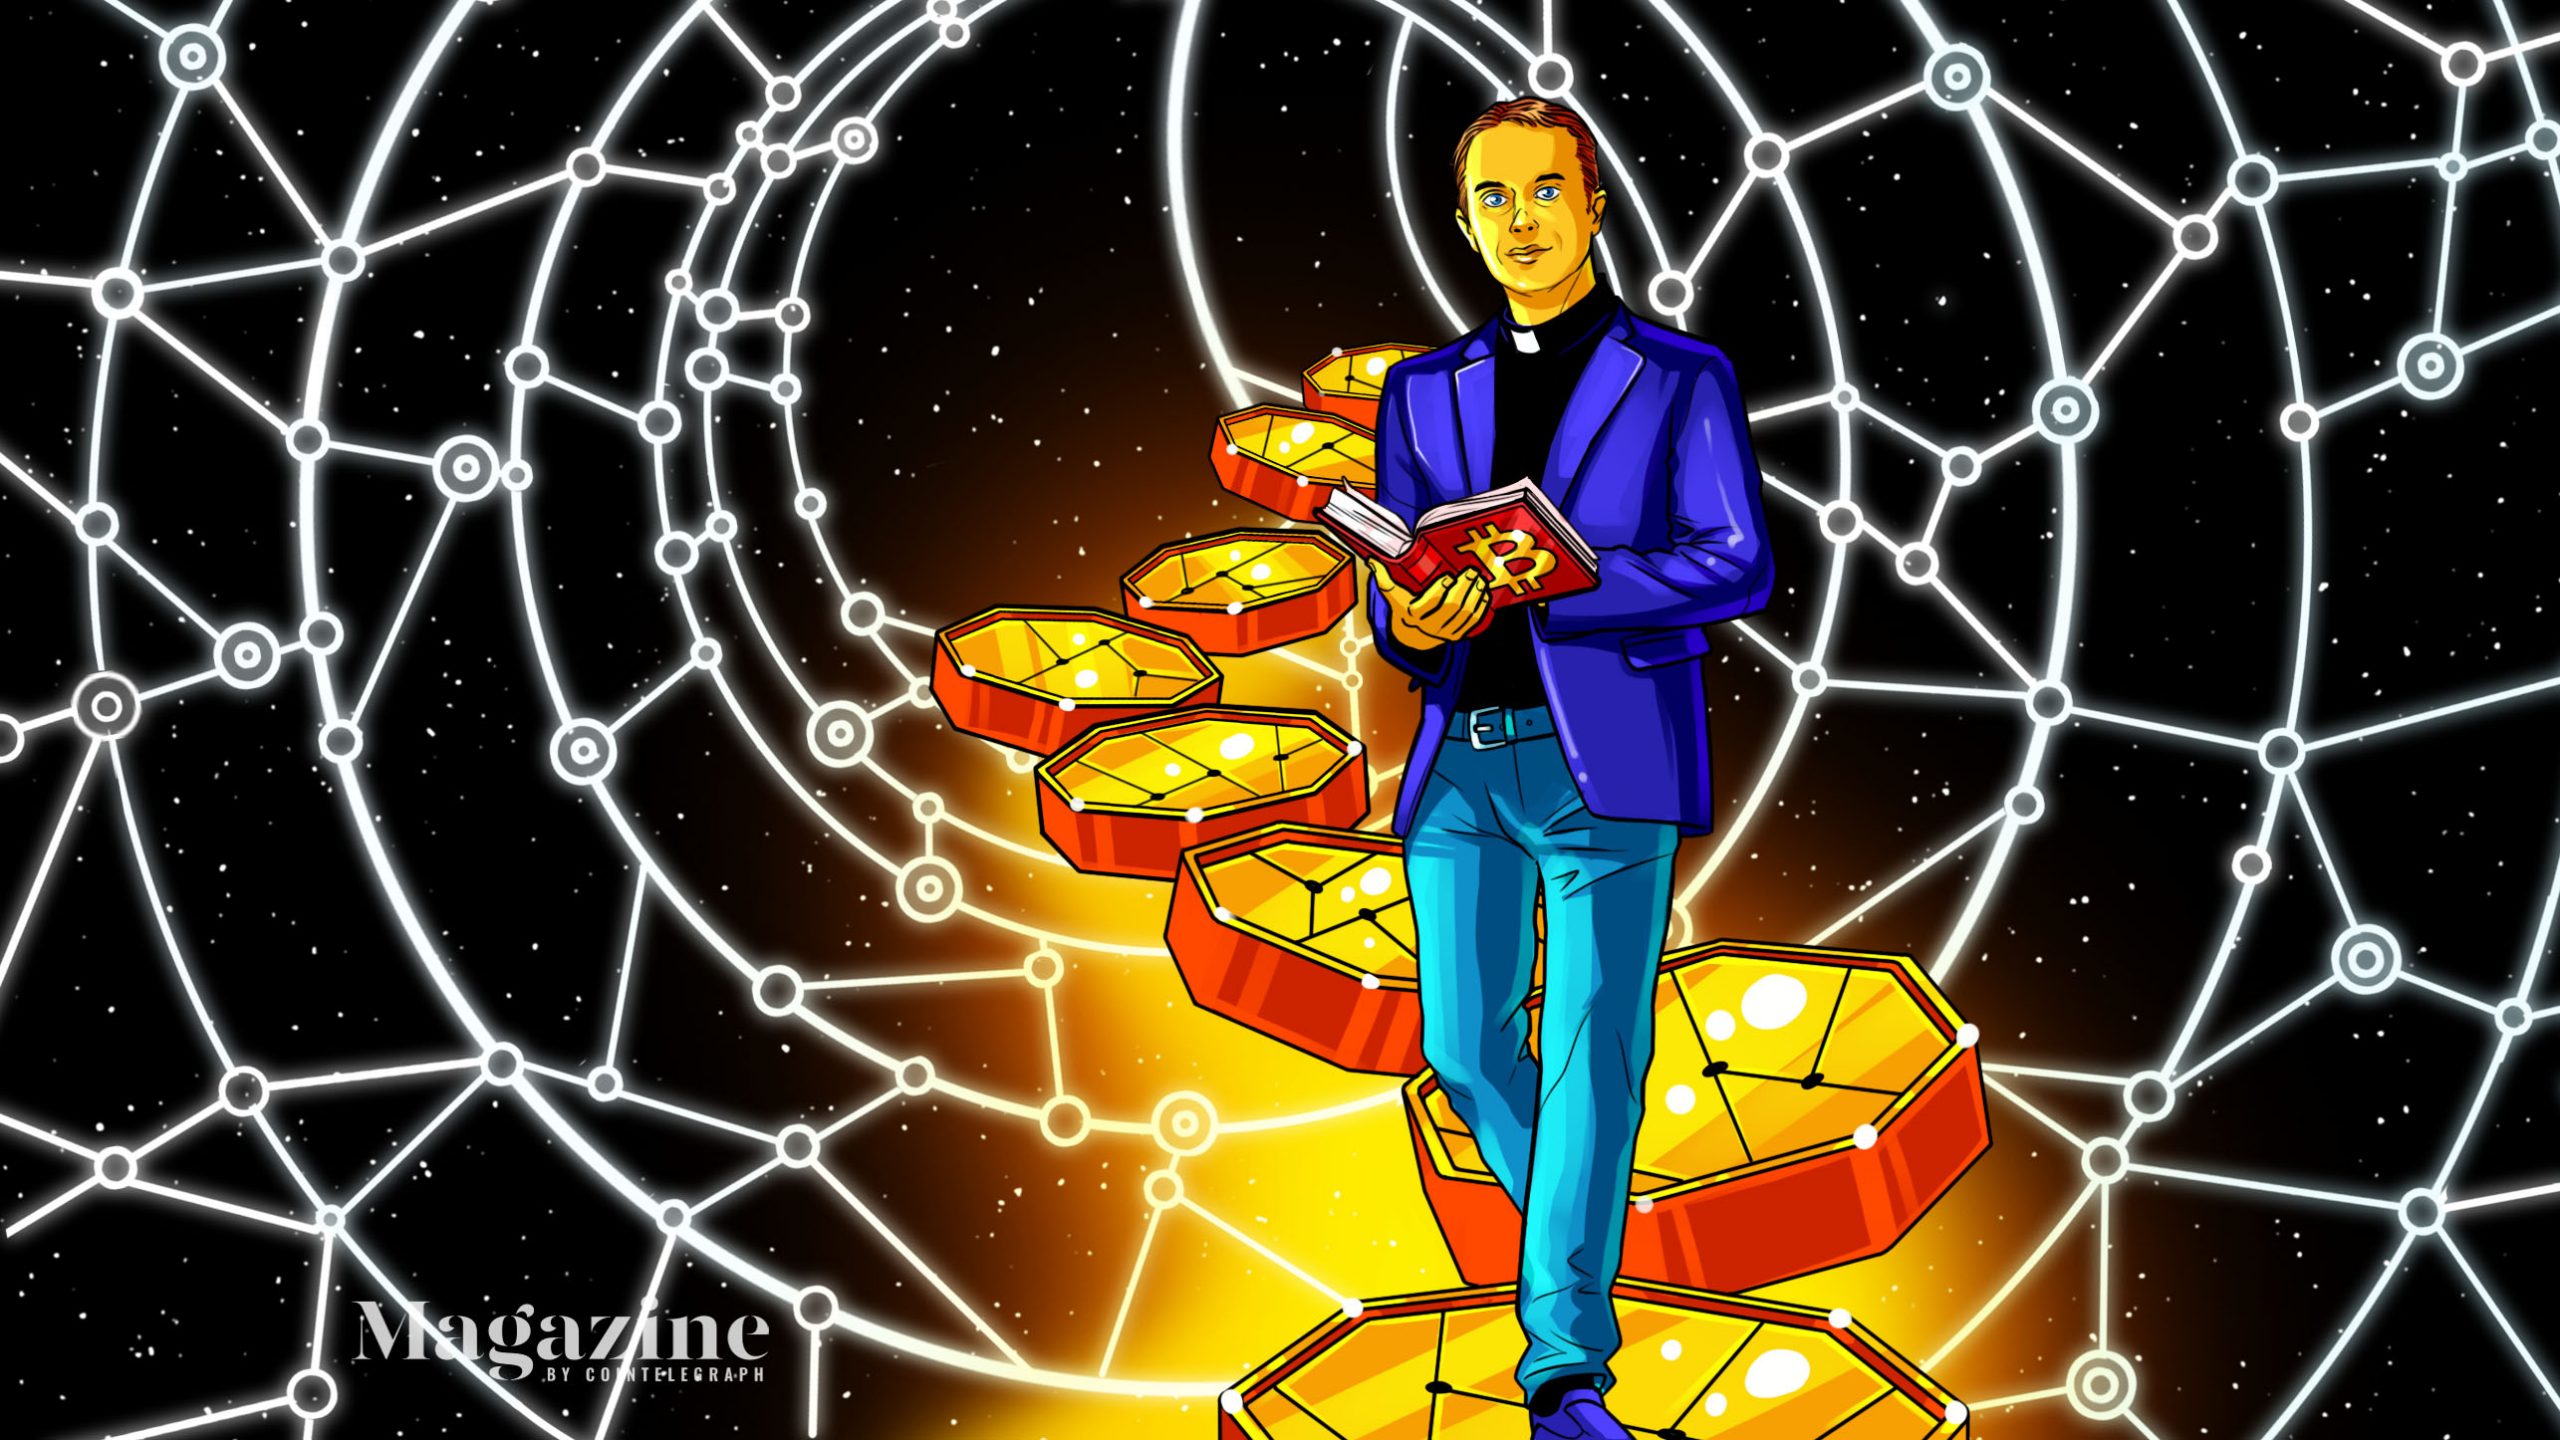 The-reformed-bitcoin-maxi-who-saw-the-light:-erik-voorhees